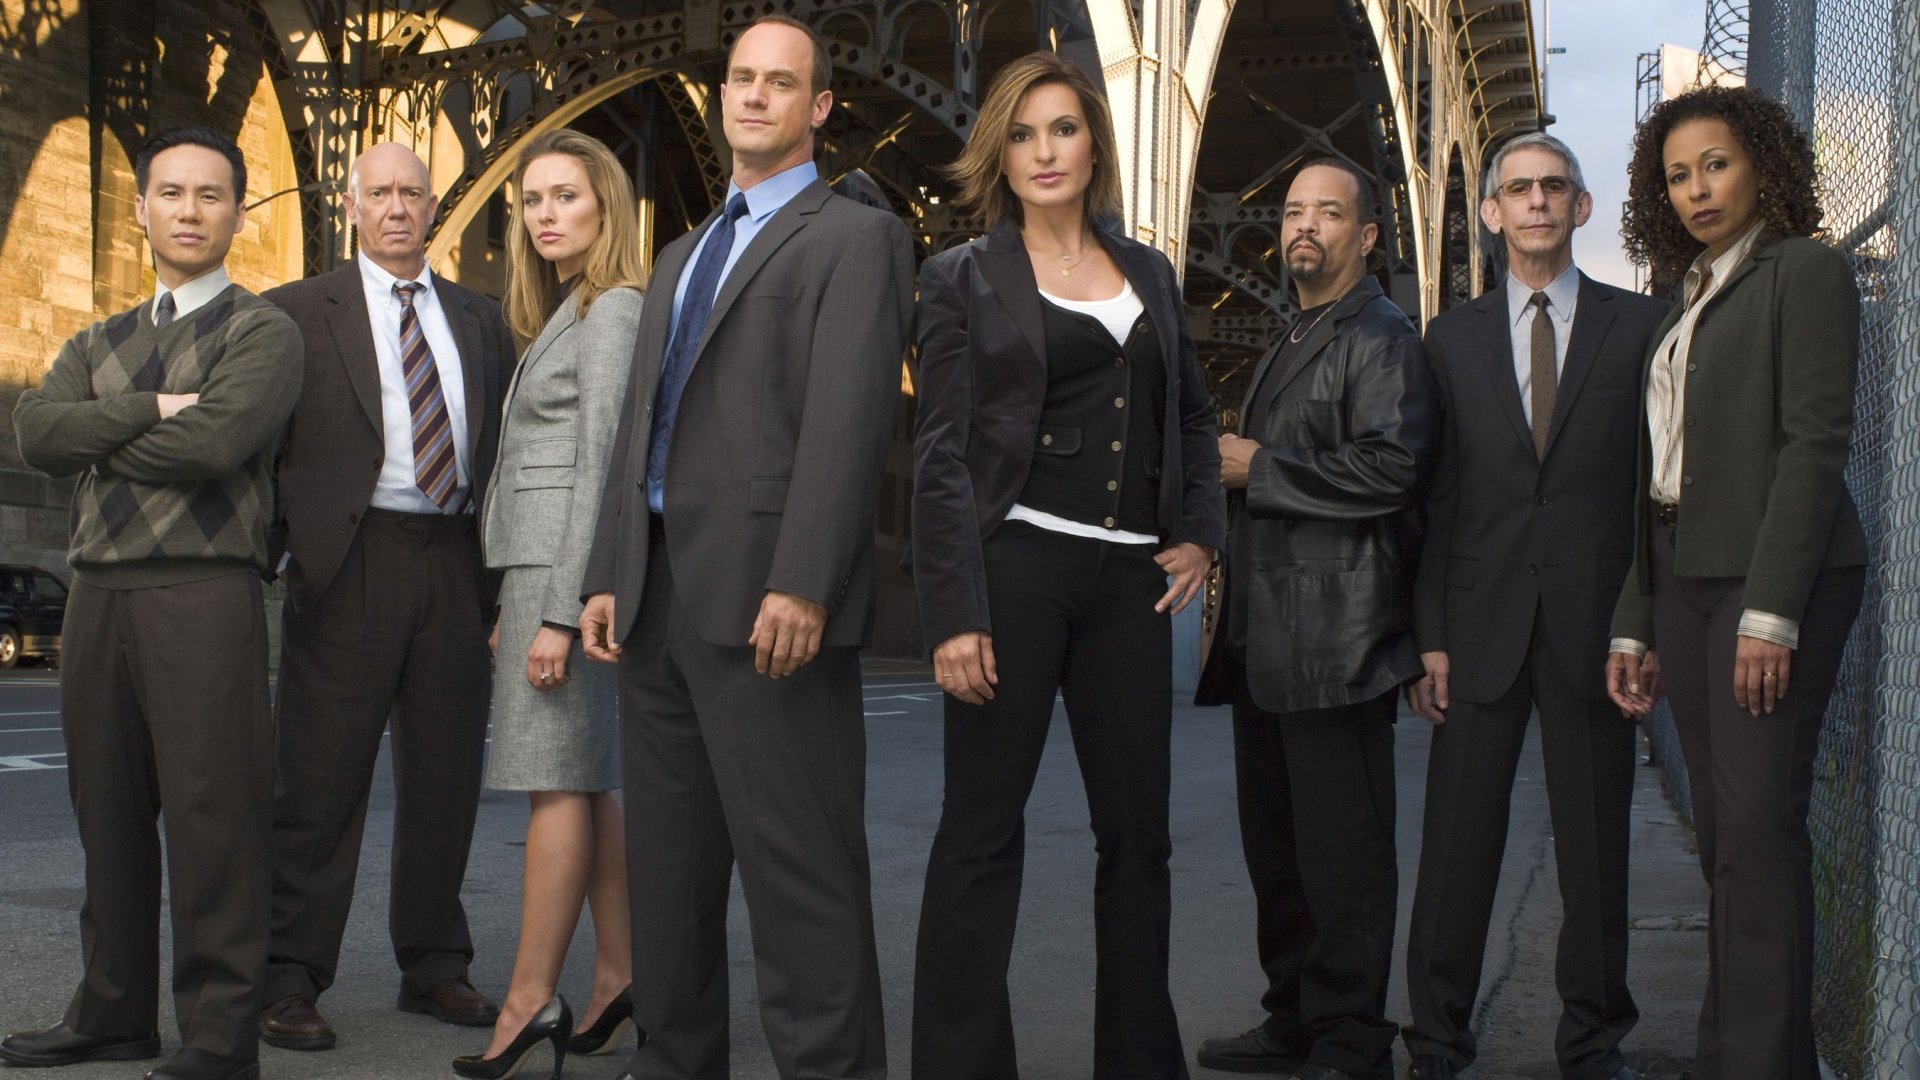 law and order, Drama, Crime, Series, Law, Order Wallpaper